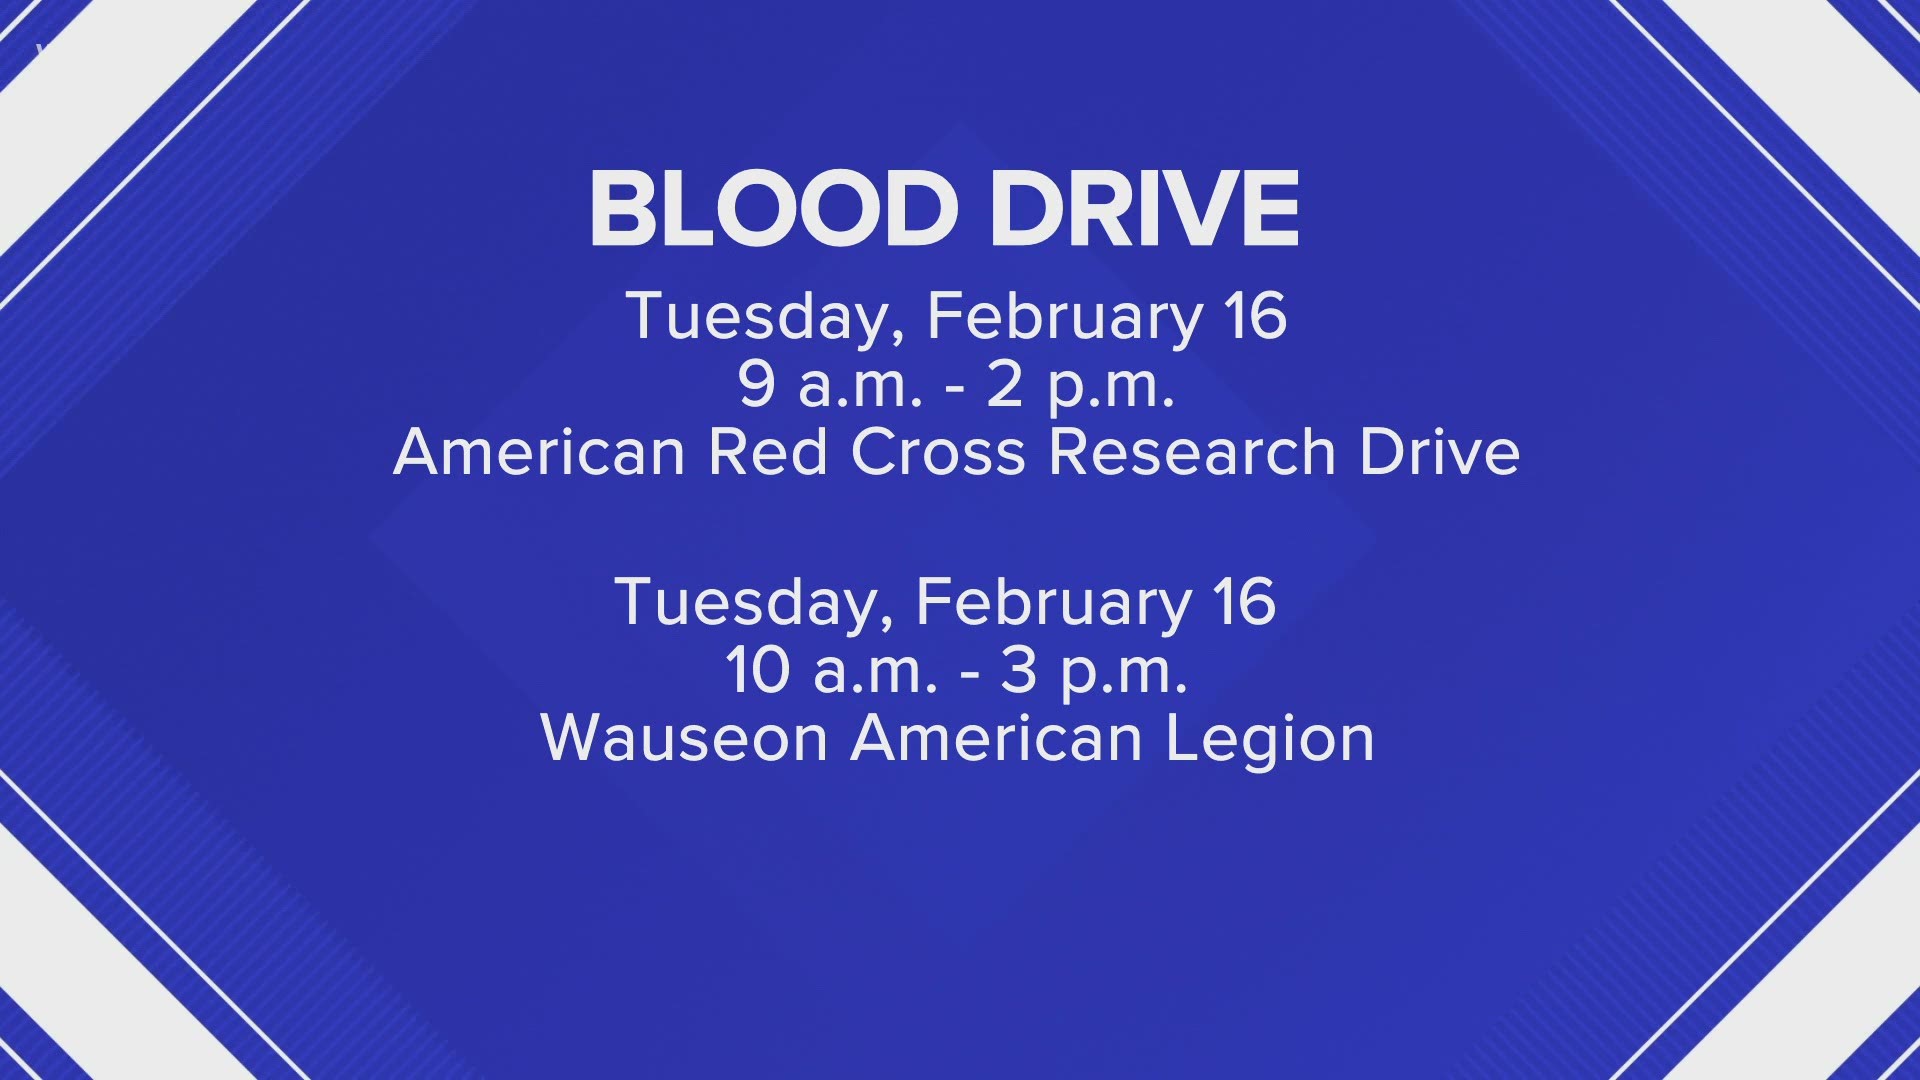 The American Red Cross is encouraging eligible donors - especially those who have recovered from COVID-19 - to give blood in honor of Black History Month.